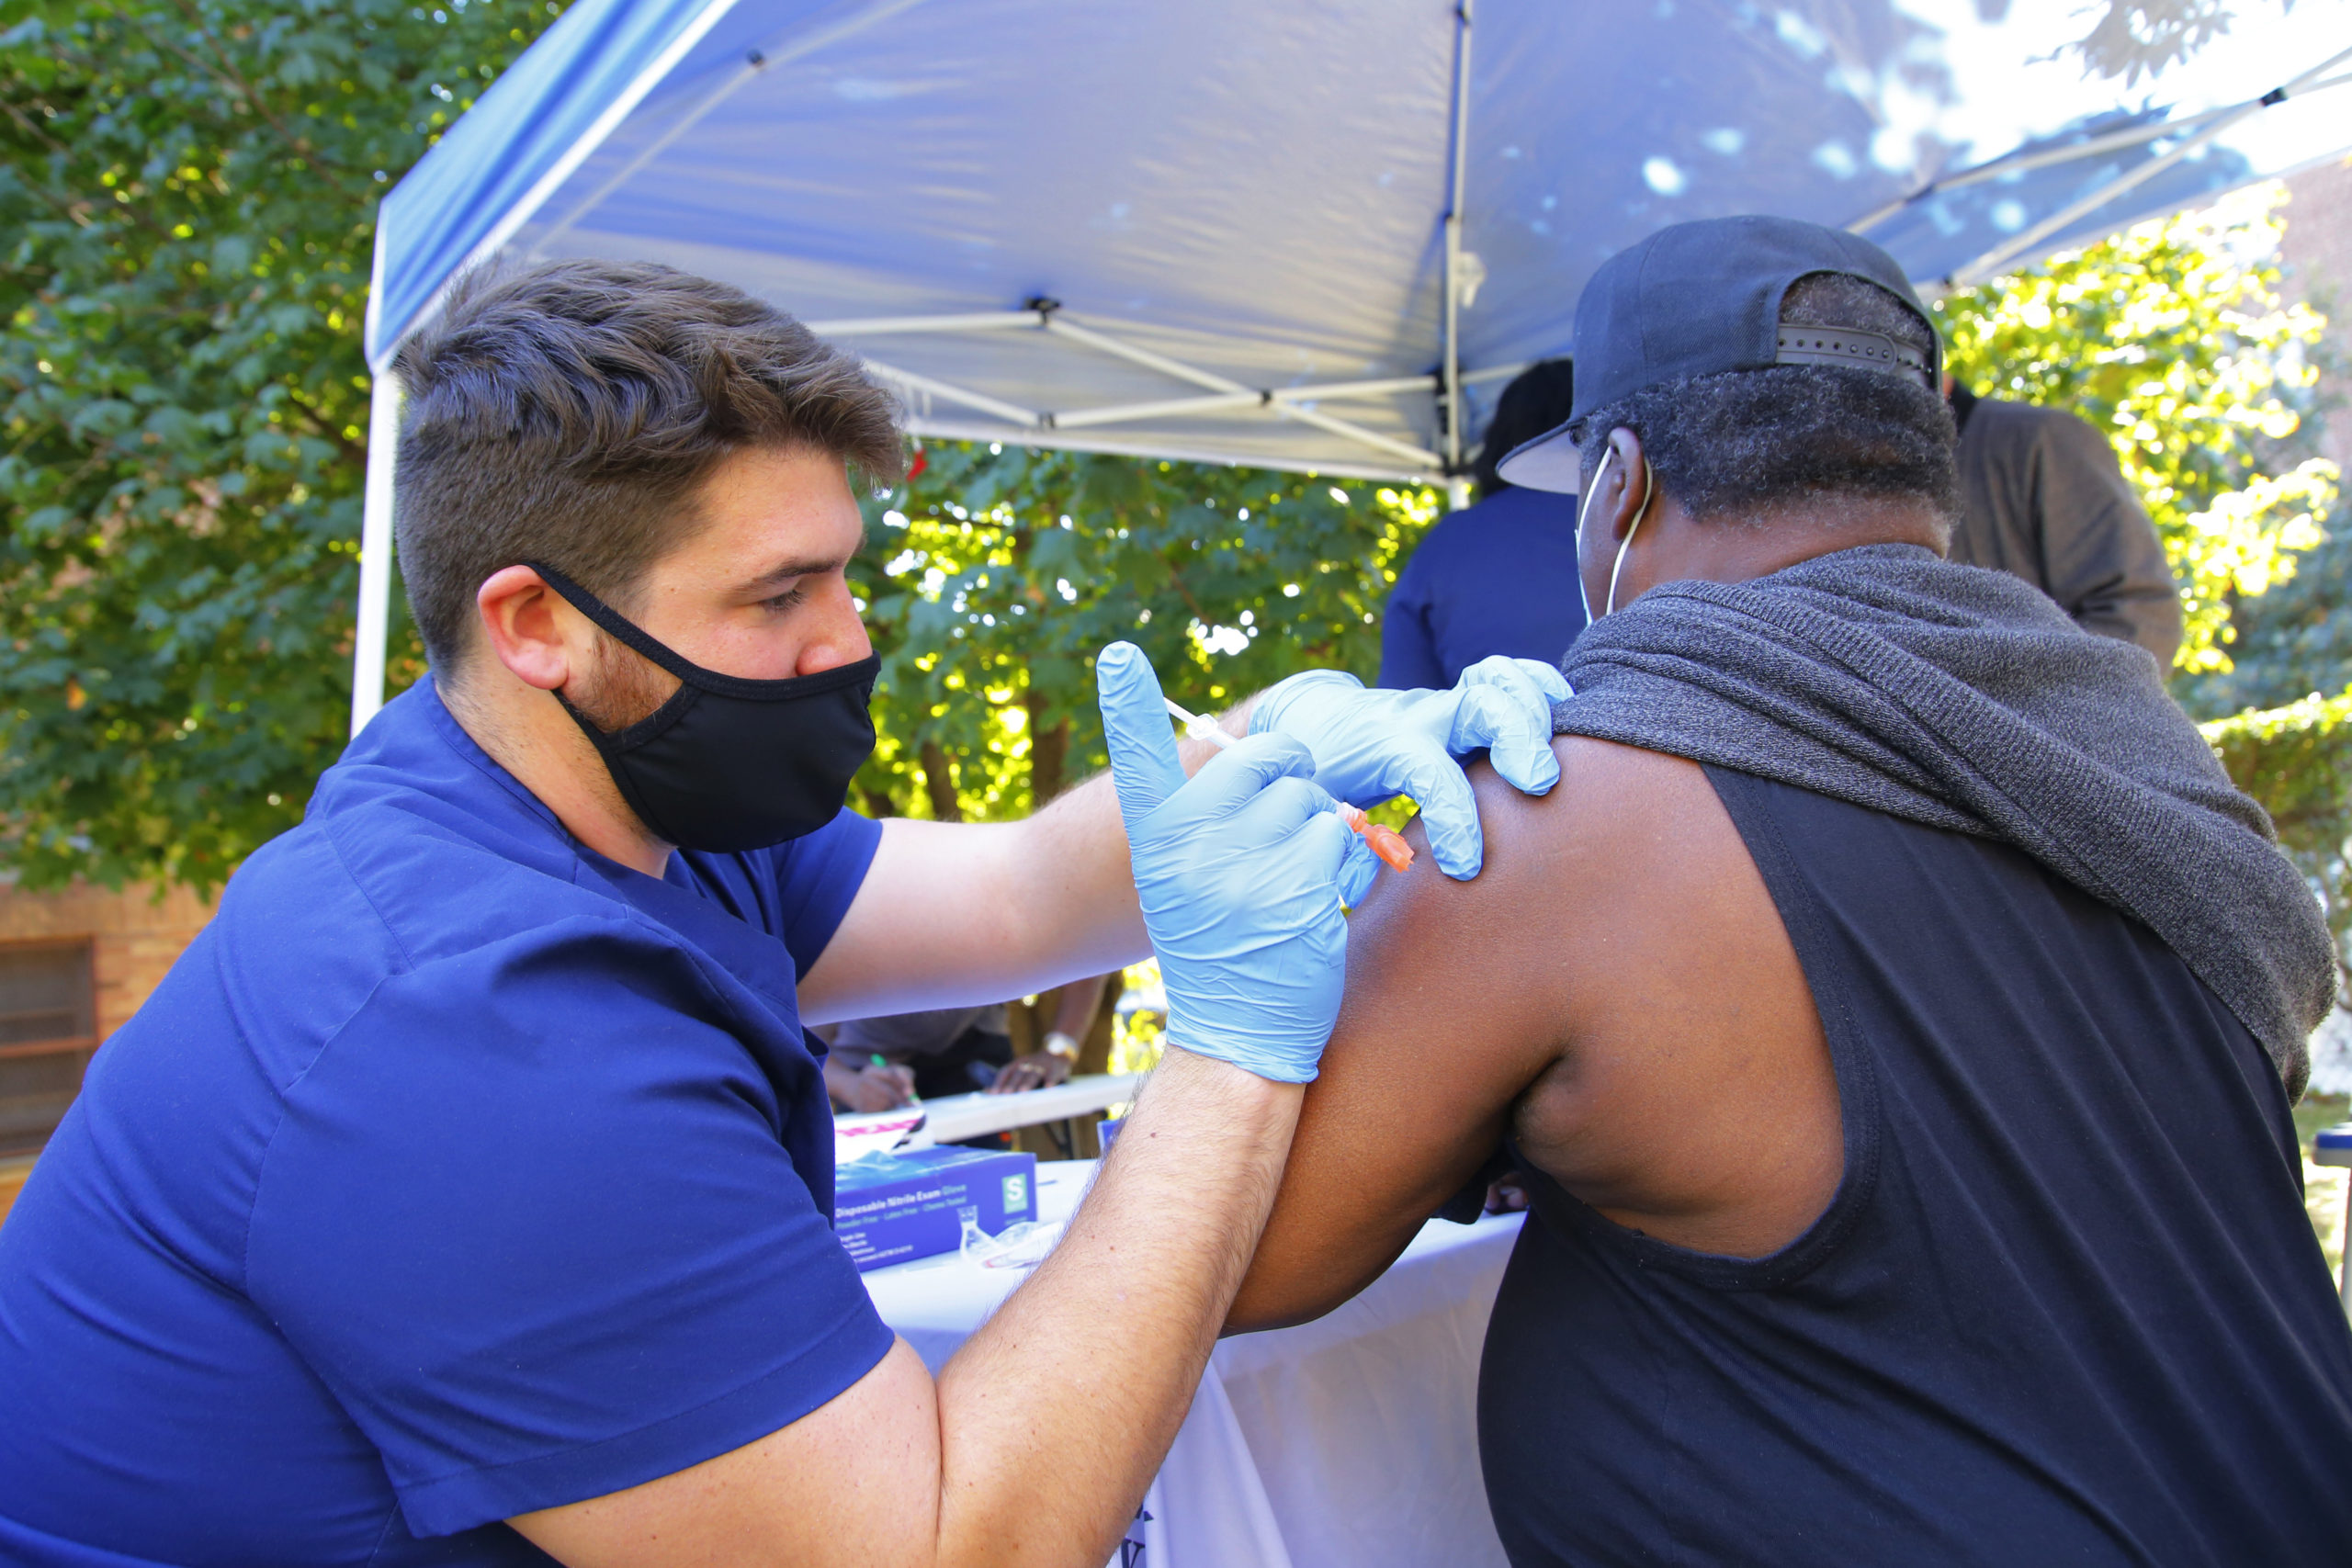 A VIP StarNETWORK medical staff member administers a Pfizer-BioNTech coronavirus (COVID-19) vaccine at a #VAXTOSCHOOL pop-up site at Life of Hope Center on October 21, 2021 in New York City. Gov. Kathy Hochul announced yesterday the opening of 25 new coronavirus (COVID-19) vaccination pop-up sites in an initiative to help increase vaccination rates among school-aged New Yorkers. The Department of Health is working alongside local county health departments, community-based organizations, and healthcare centers to install these sites in different regions of the state. According to the state COVID-19 vaccine tracker, since October 18, 62 percent of 12 to 15-year-olds and 72 percent of 16 to 25-year-olds have received at least one coronavirus vaccine dose. (Photo by Michael M. Santiago/Getty Images)